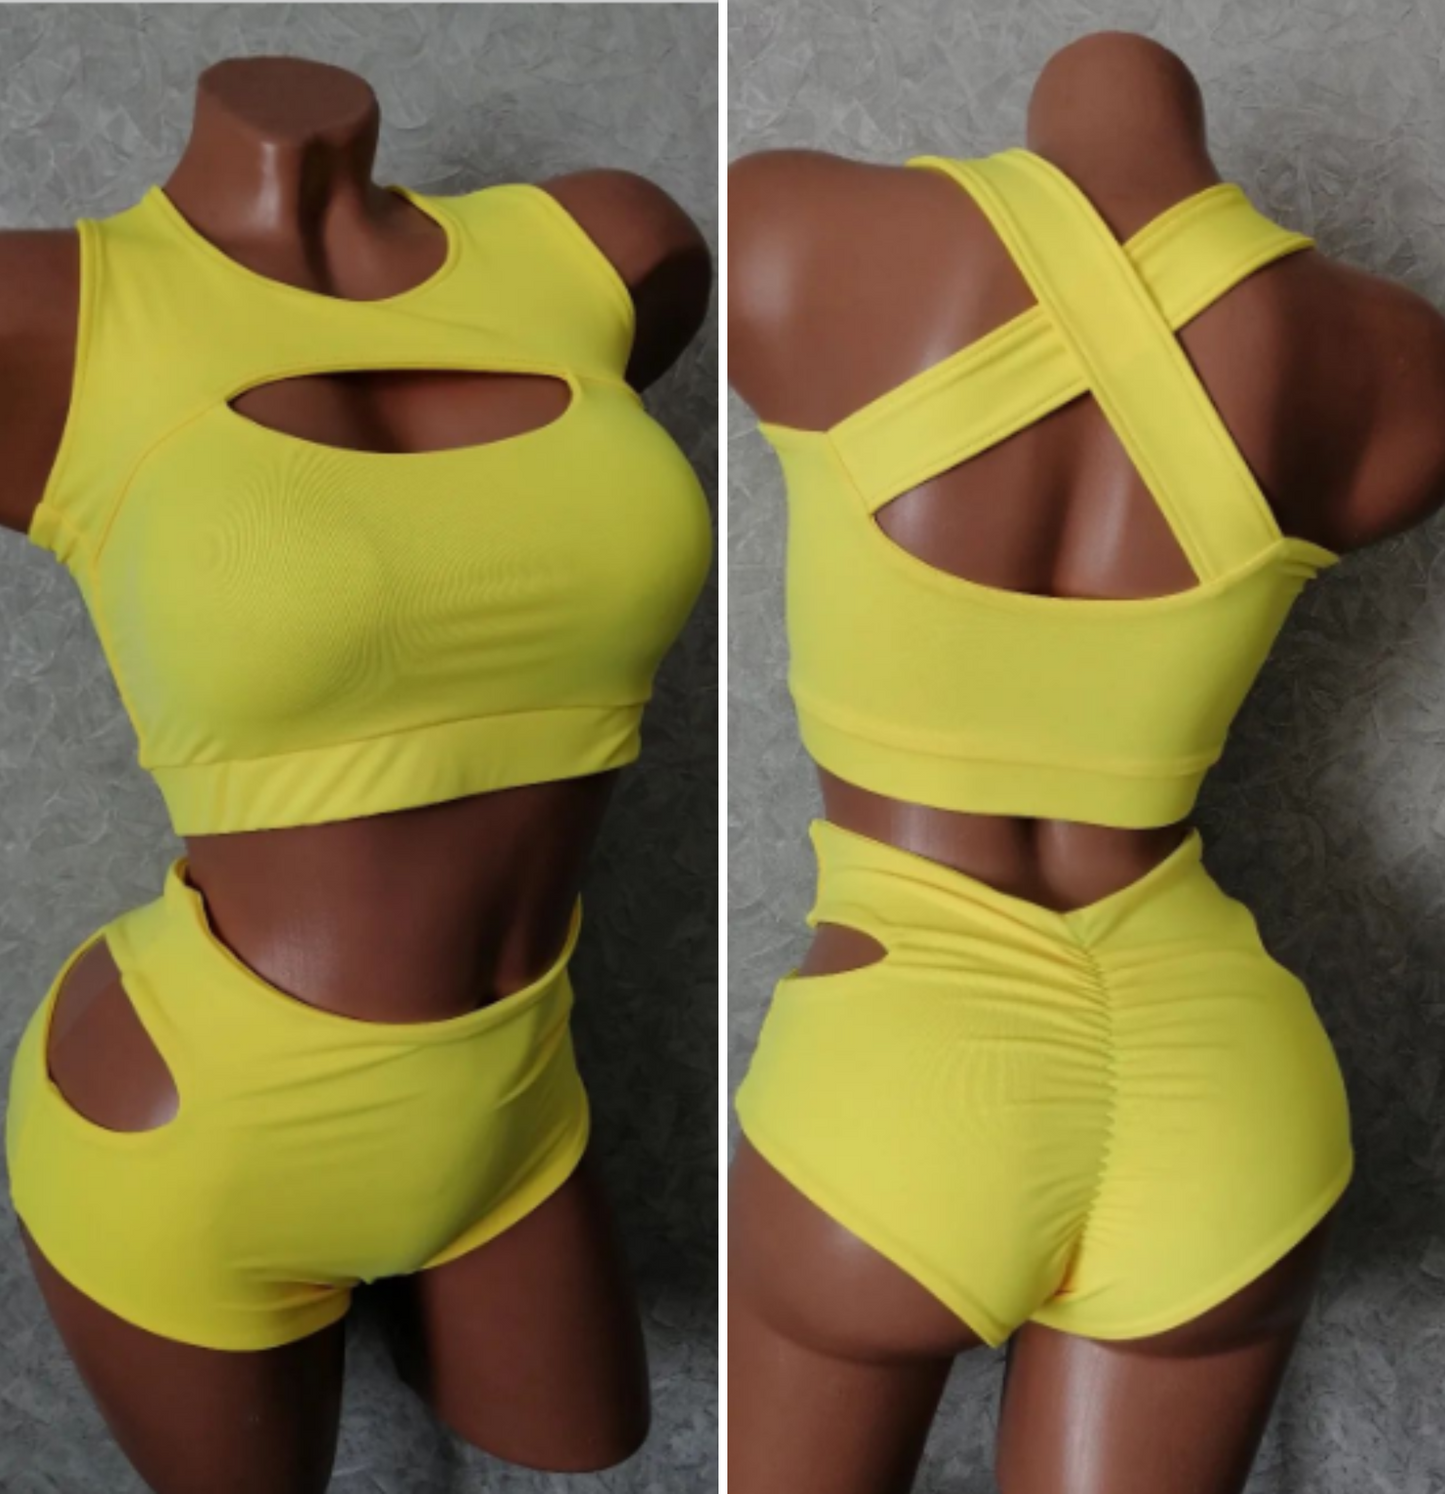 Yellow pole dance outfit with best support of bust